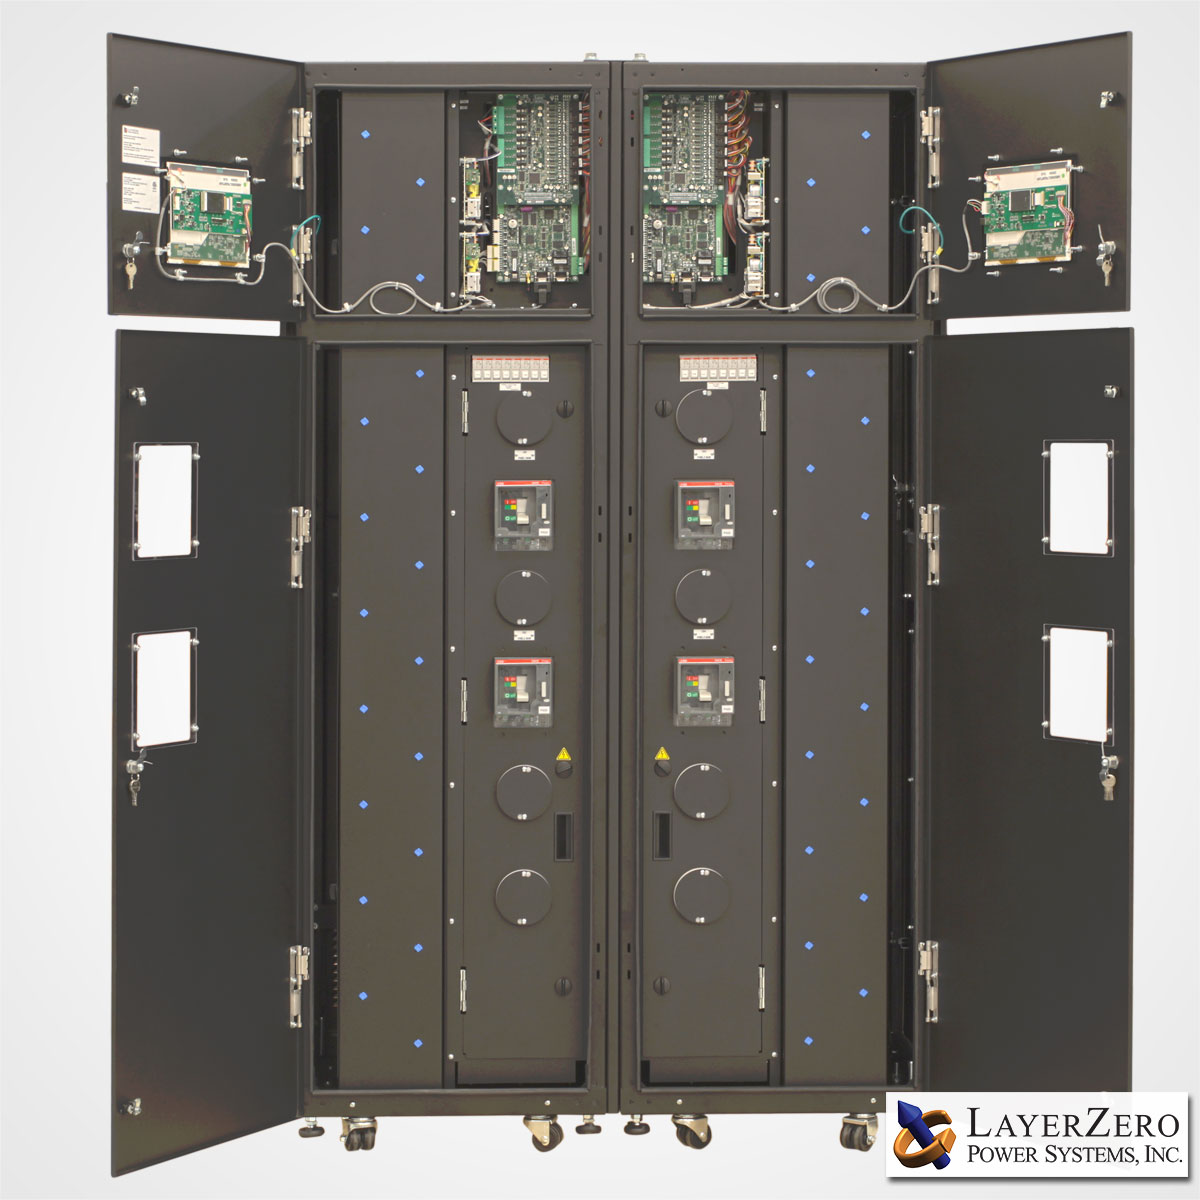 Two LayerZero Series 70: eRPP-FS Cabinets Side-By-Side Outer Doors Open.